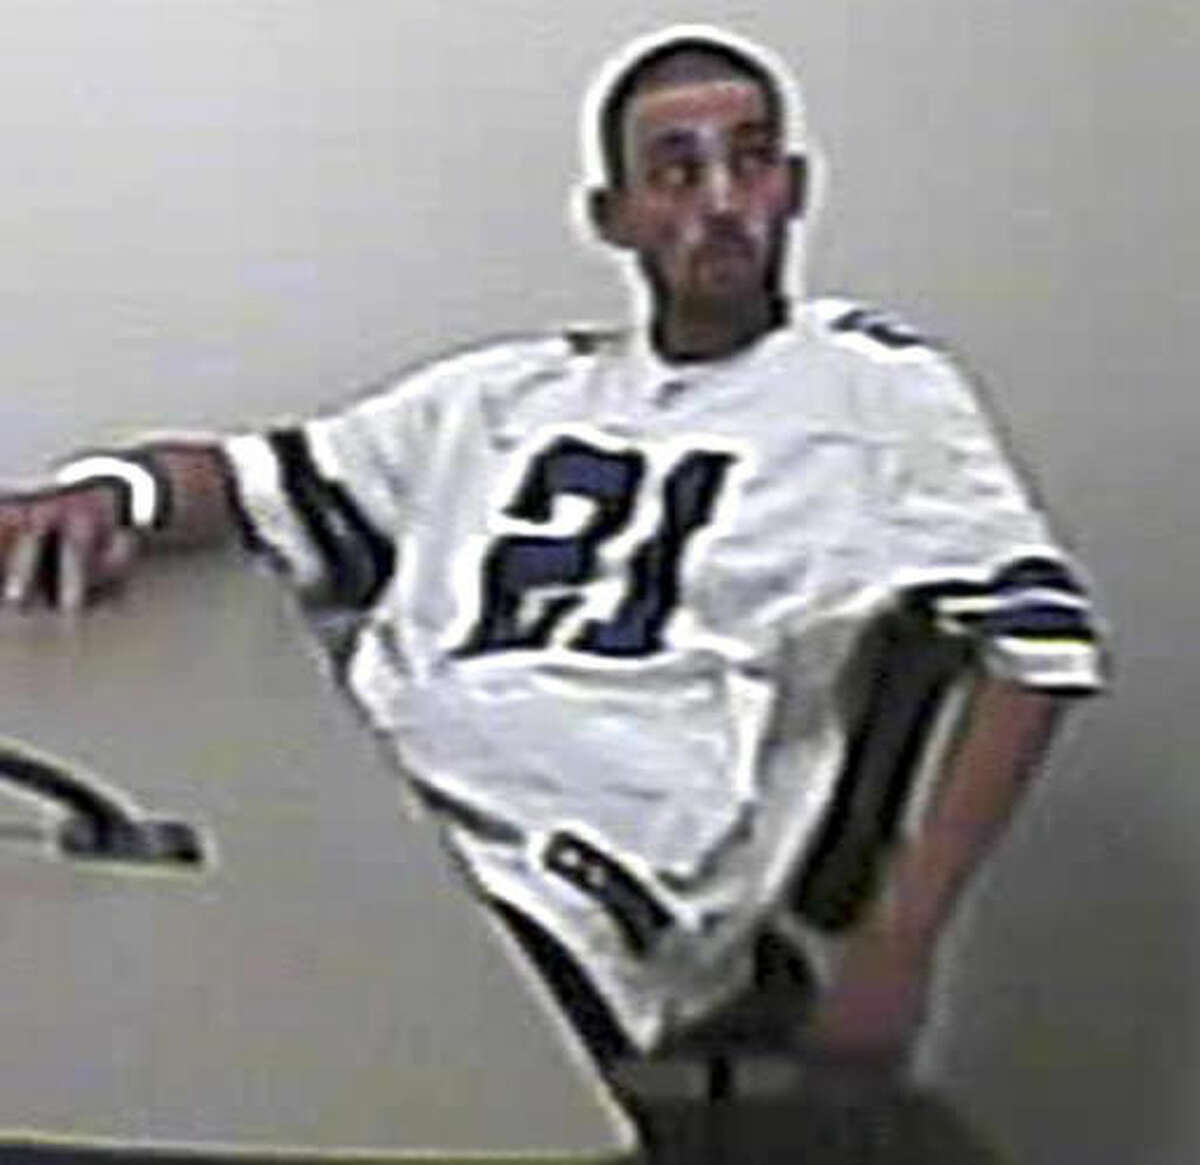 This Friday, Sept. 2, 2016 photo provided by the North Las Vegas Police Department shows Alonso Perez handcuffed to a table in a police interview room where he was awaiting questioning in a homicide investigation. On Tuesday, Sept. 6, 2016, authorities said he remained on the loose, four days after he broke his metal handcuffs and escaped from custody. (North Las Vegas Police Department via AP)